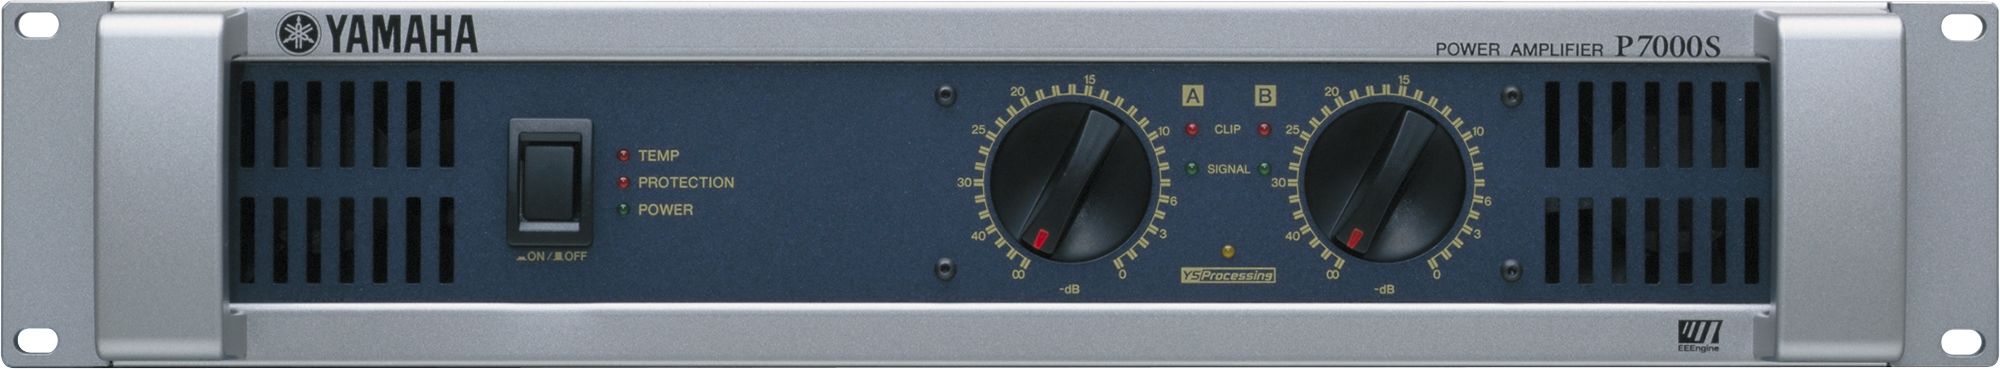 P Series - Overview - Power Amplifiers - Professional Audio - Products